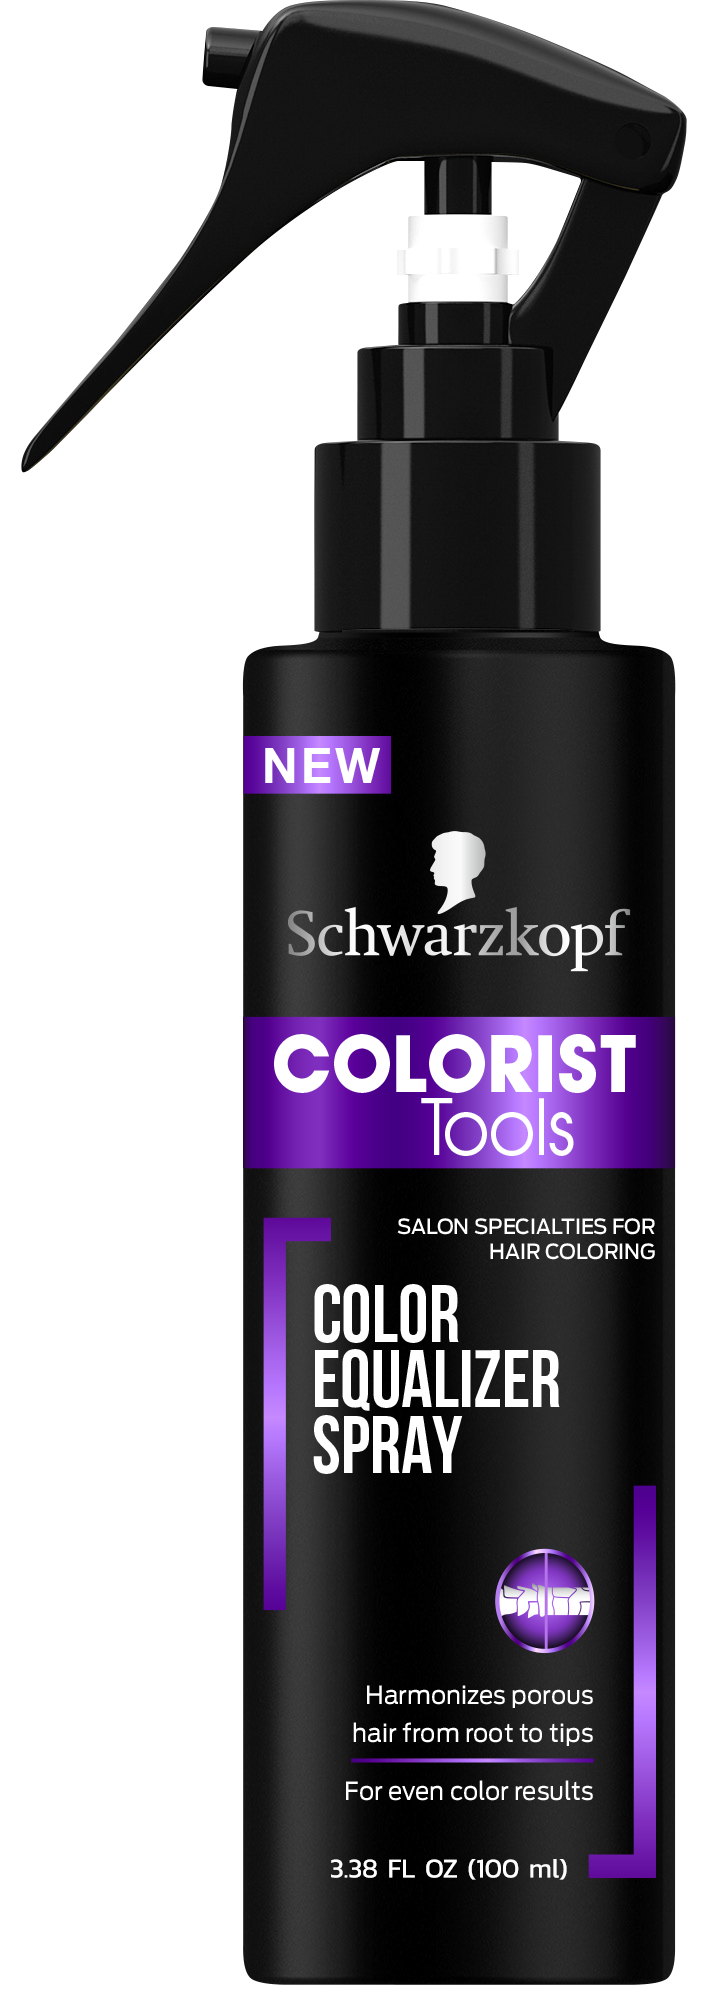 Schwarzkopf Colorist Tools Hair Dye Color Equalizer Spray, 3.38 ounce - image 2 of 7